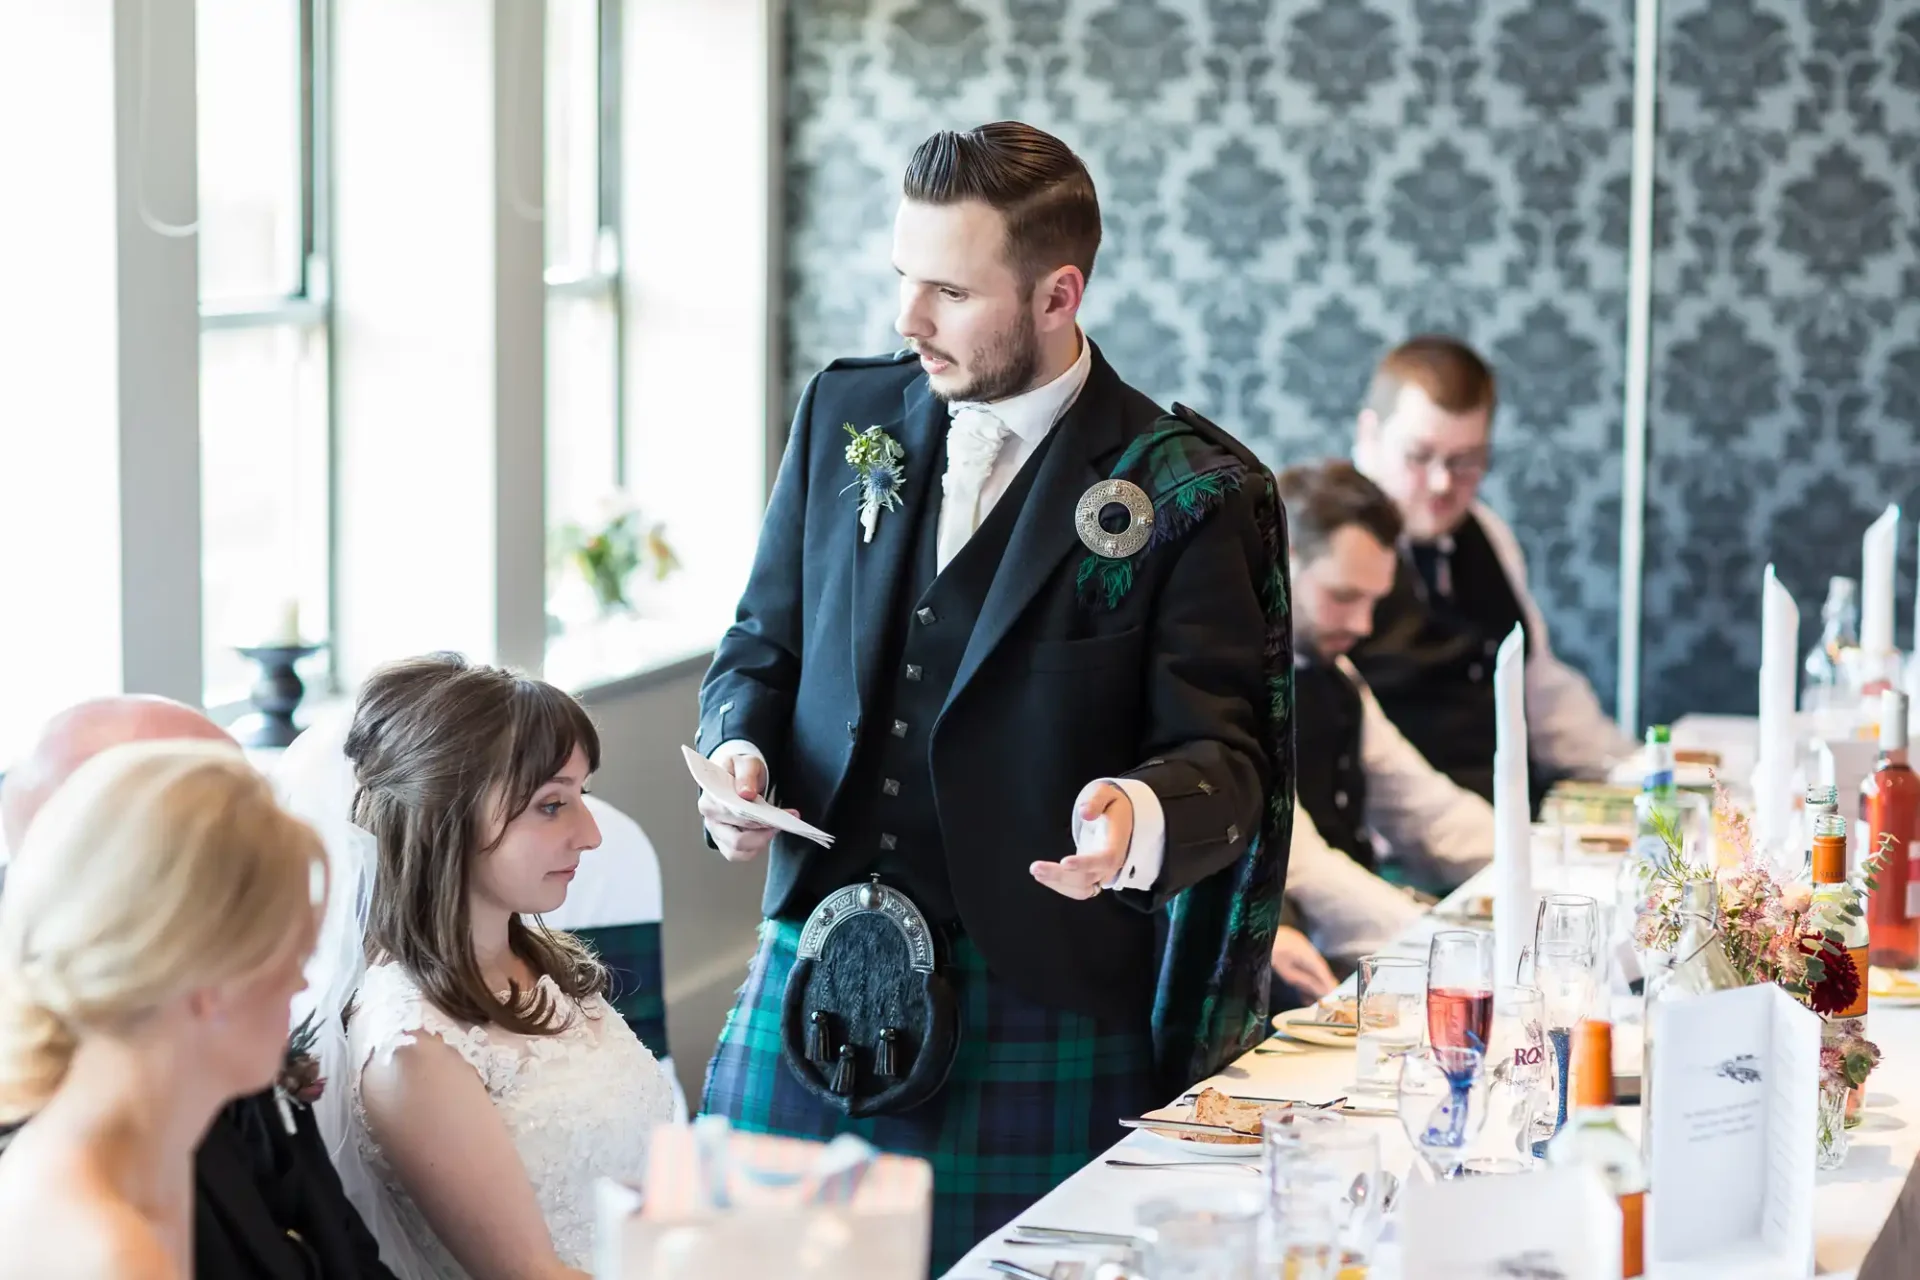 A groom in a kilt holding a microphone and speech notes at a wedding reception table, with a bride and other guests listening attentively.